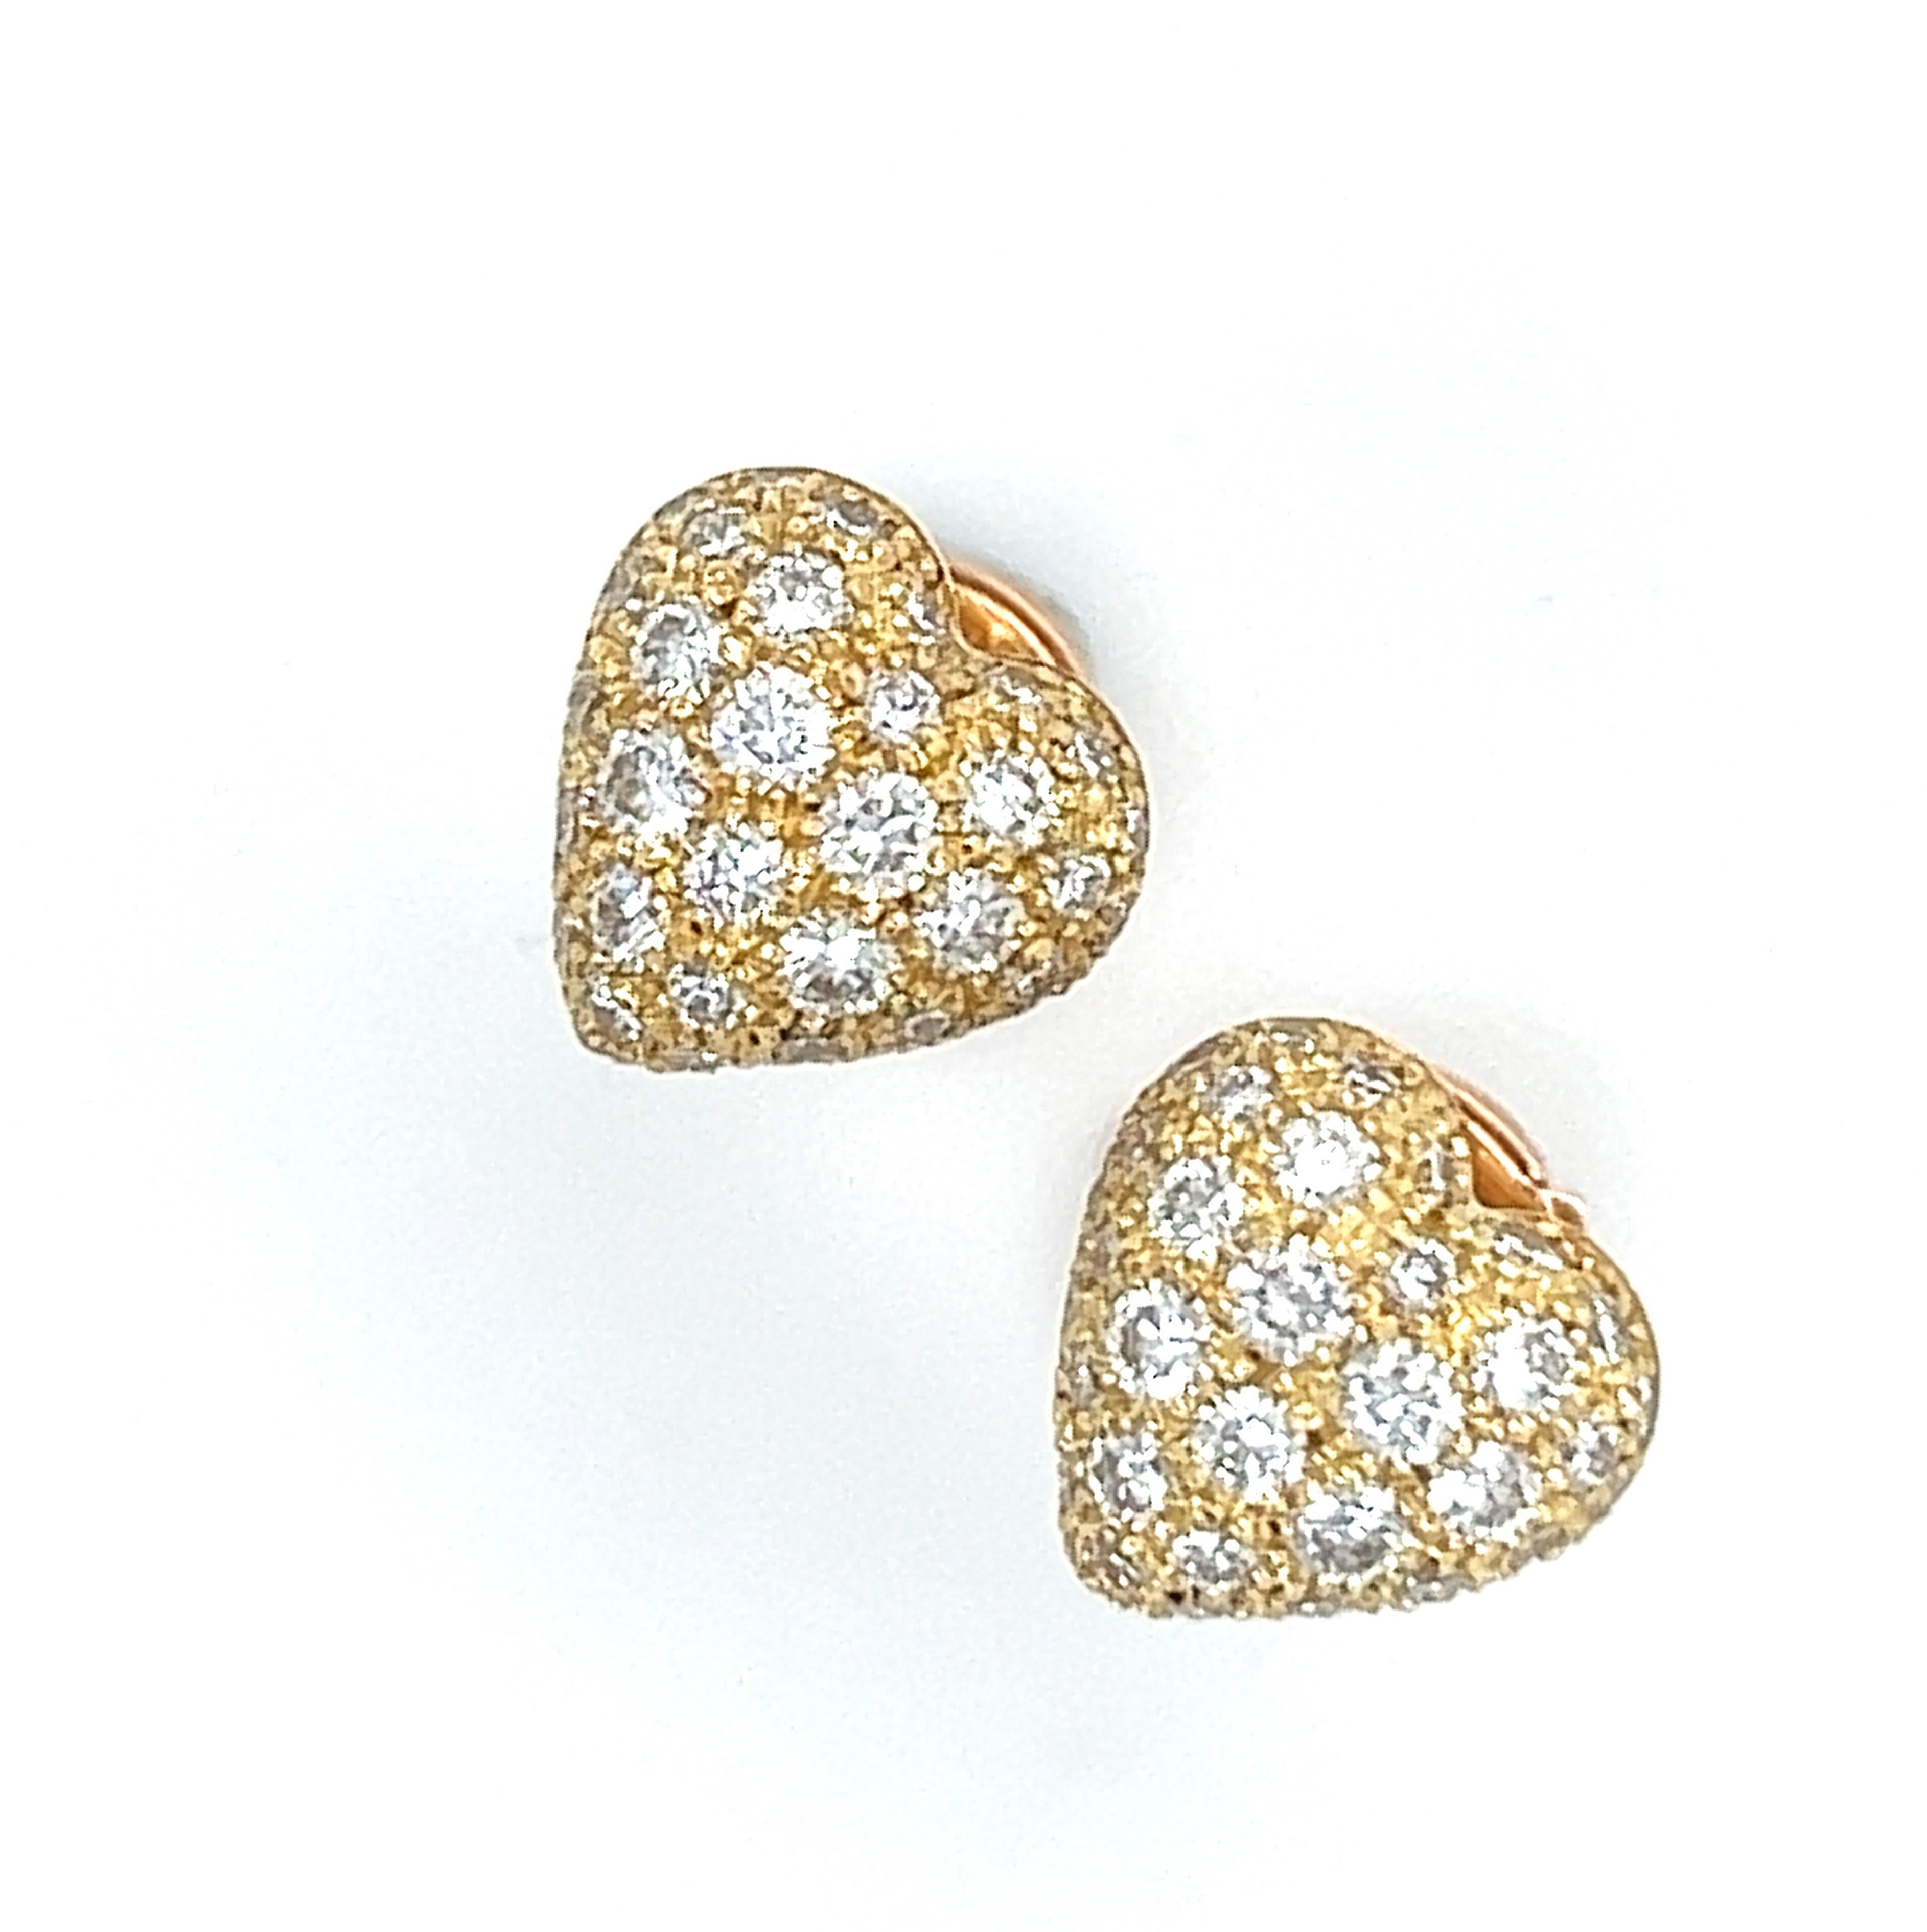 Original 1990, Cartier White Diamond 18Kt Yellow Gold Heart  shaped stud earrings.
A very precious, iconic Cartier top quality circa 1.22KT white diamond heart in a simple, all time wearable 18kt yellow gold setting.
Brimming with utter grace and